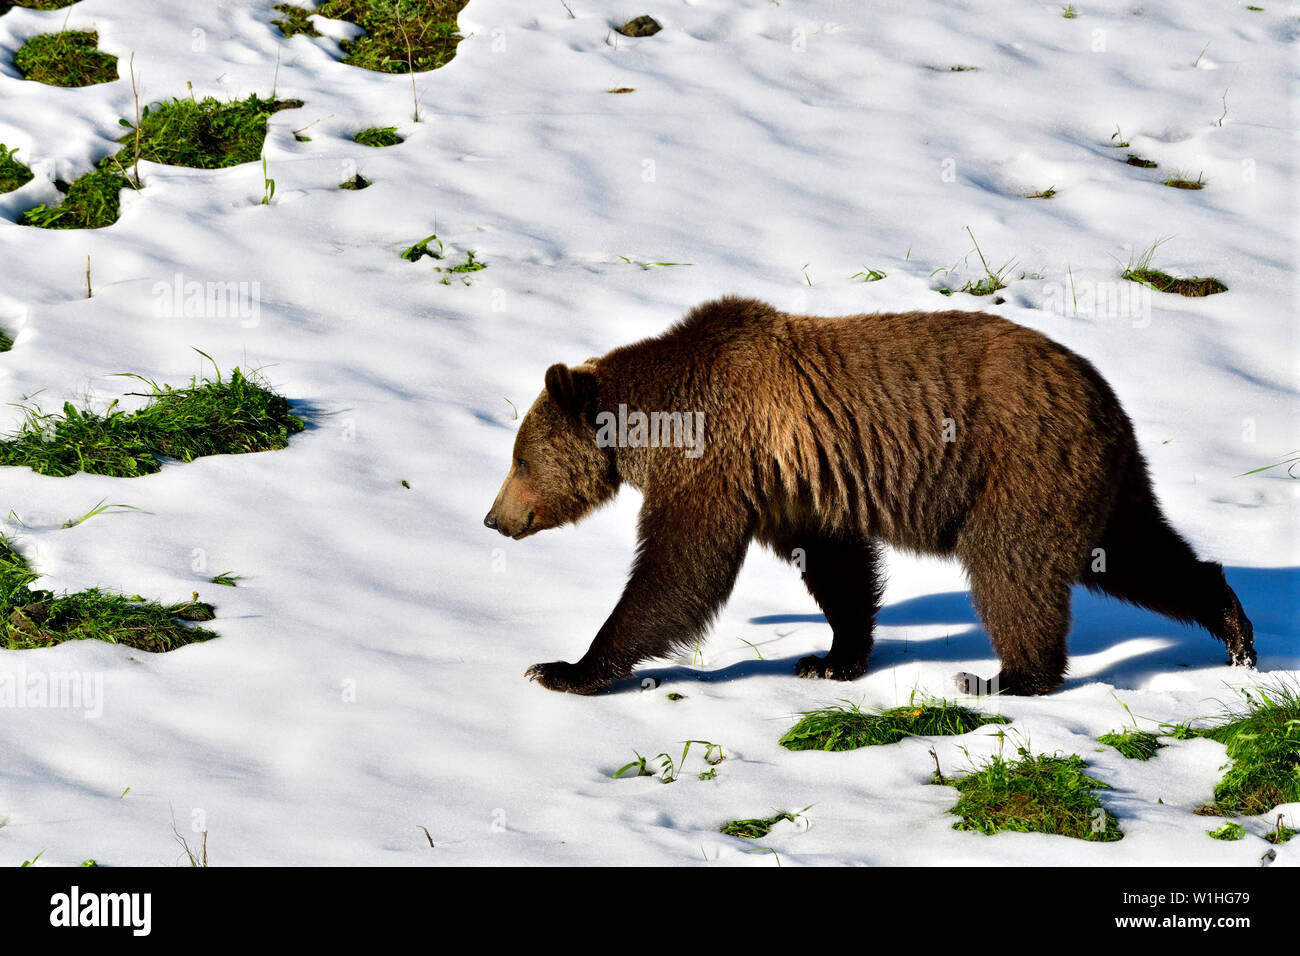 A close up side view of an adult grizzly bear 'Ursus arctos' walking along a snow patch on a  grassy hillside in rural Alberta Canada Stock Photo